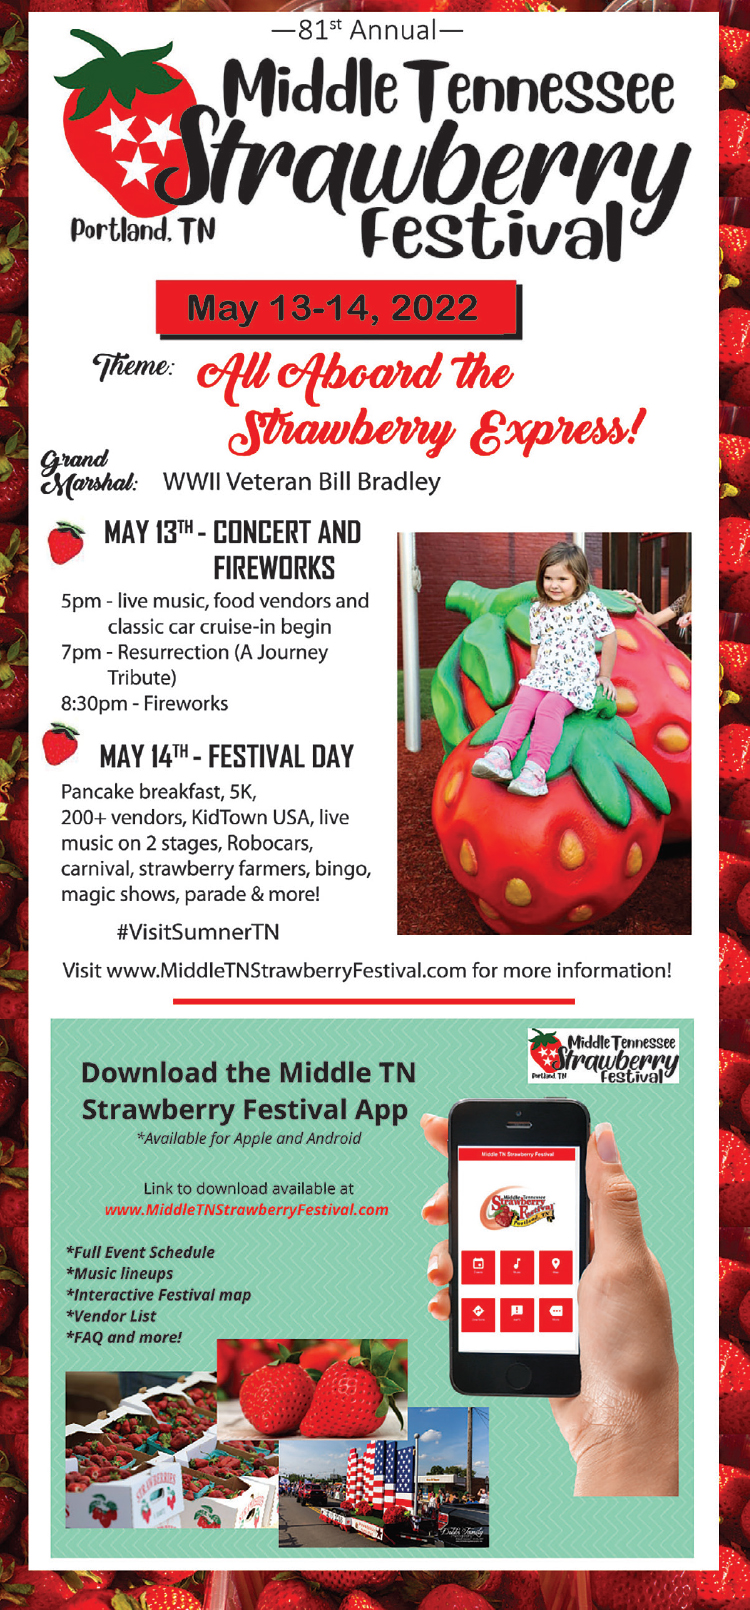 Portland celebrates 81st Annual Middle Tennessee Strawberry Festival